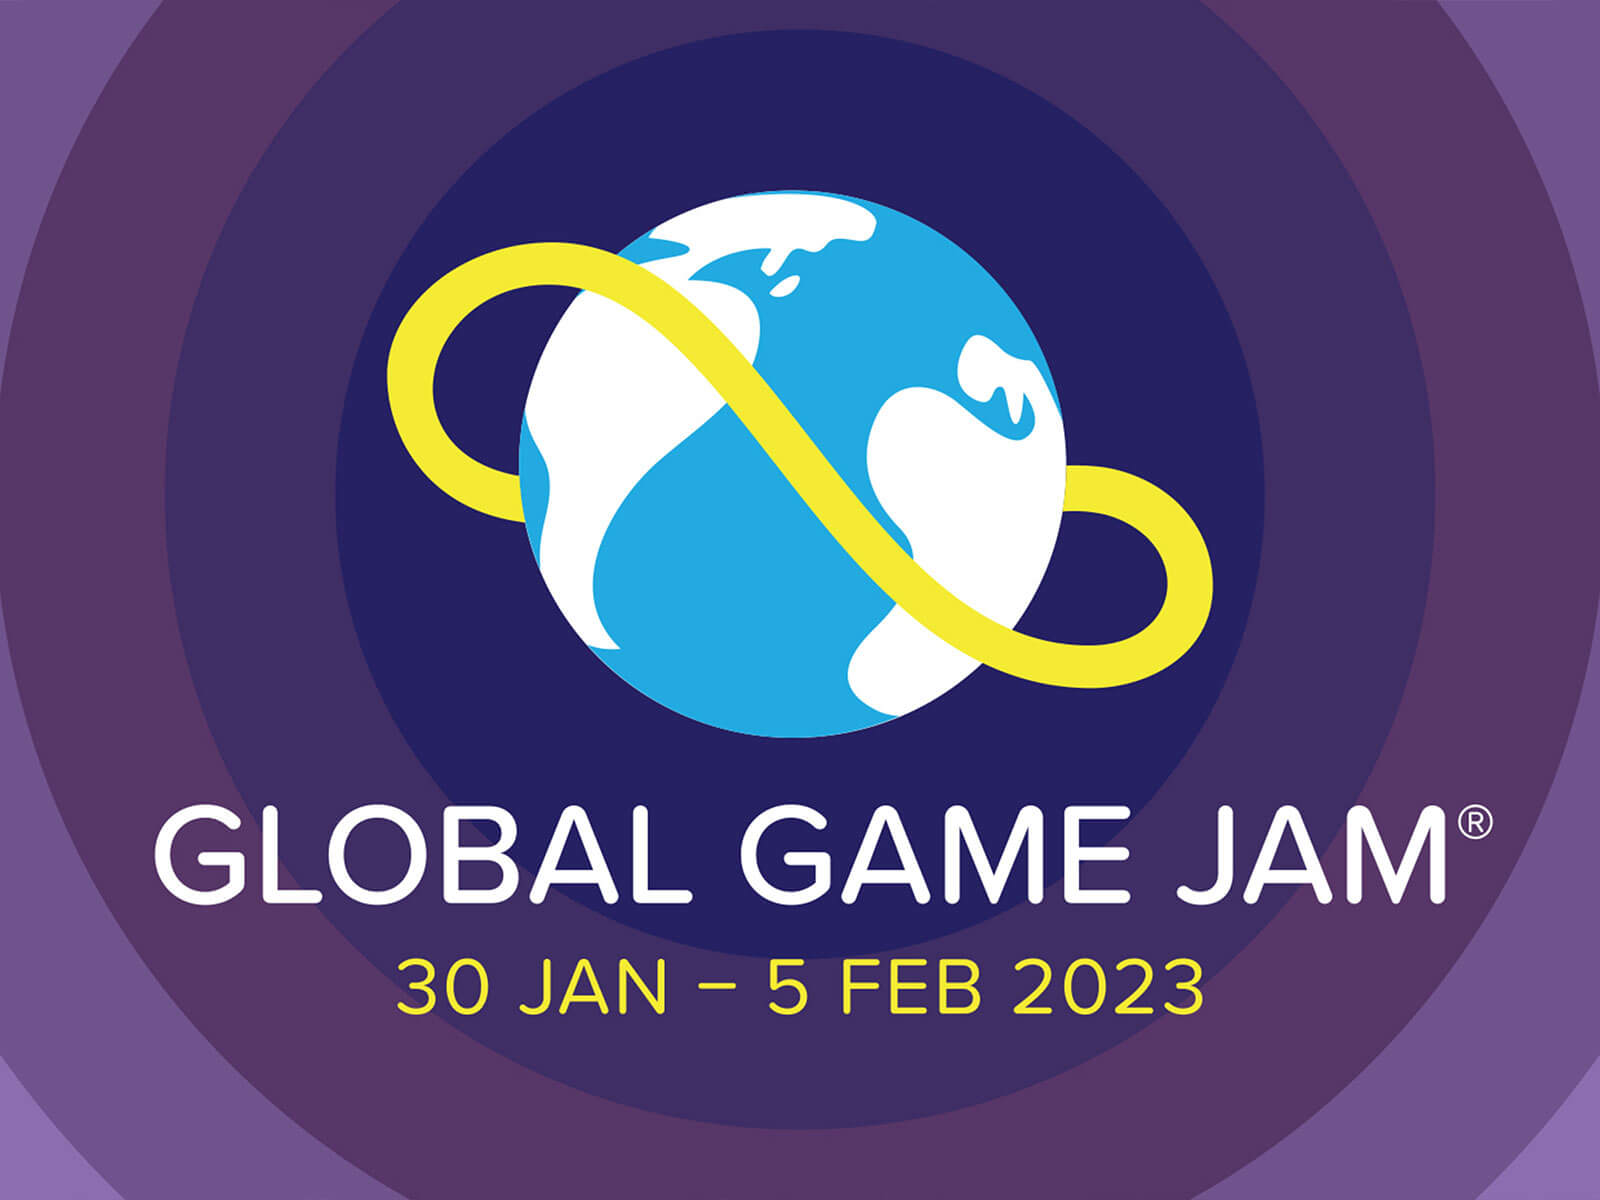 Global game jam logo with its dates listed below it.